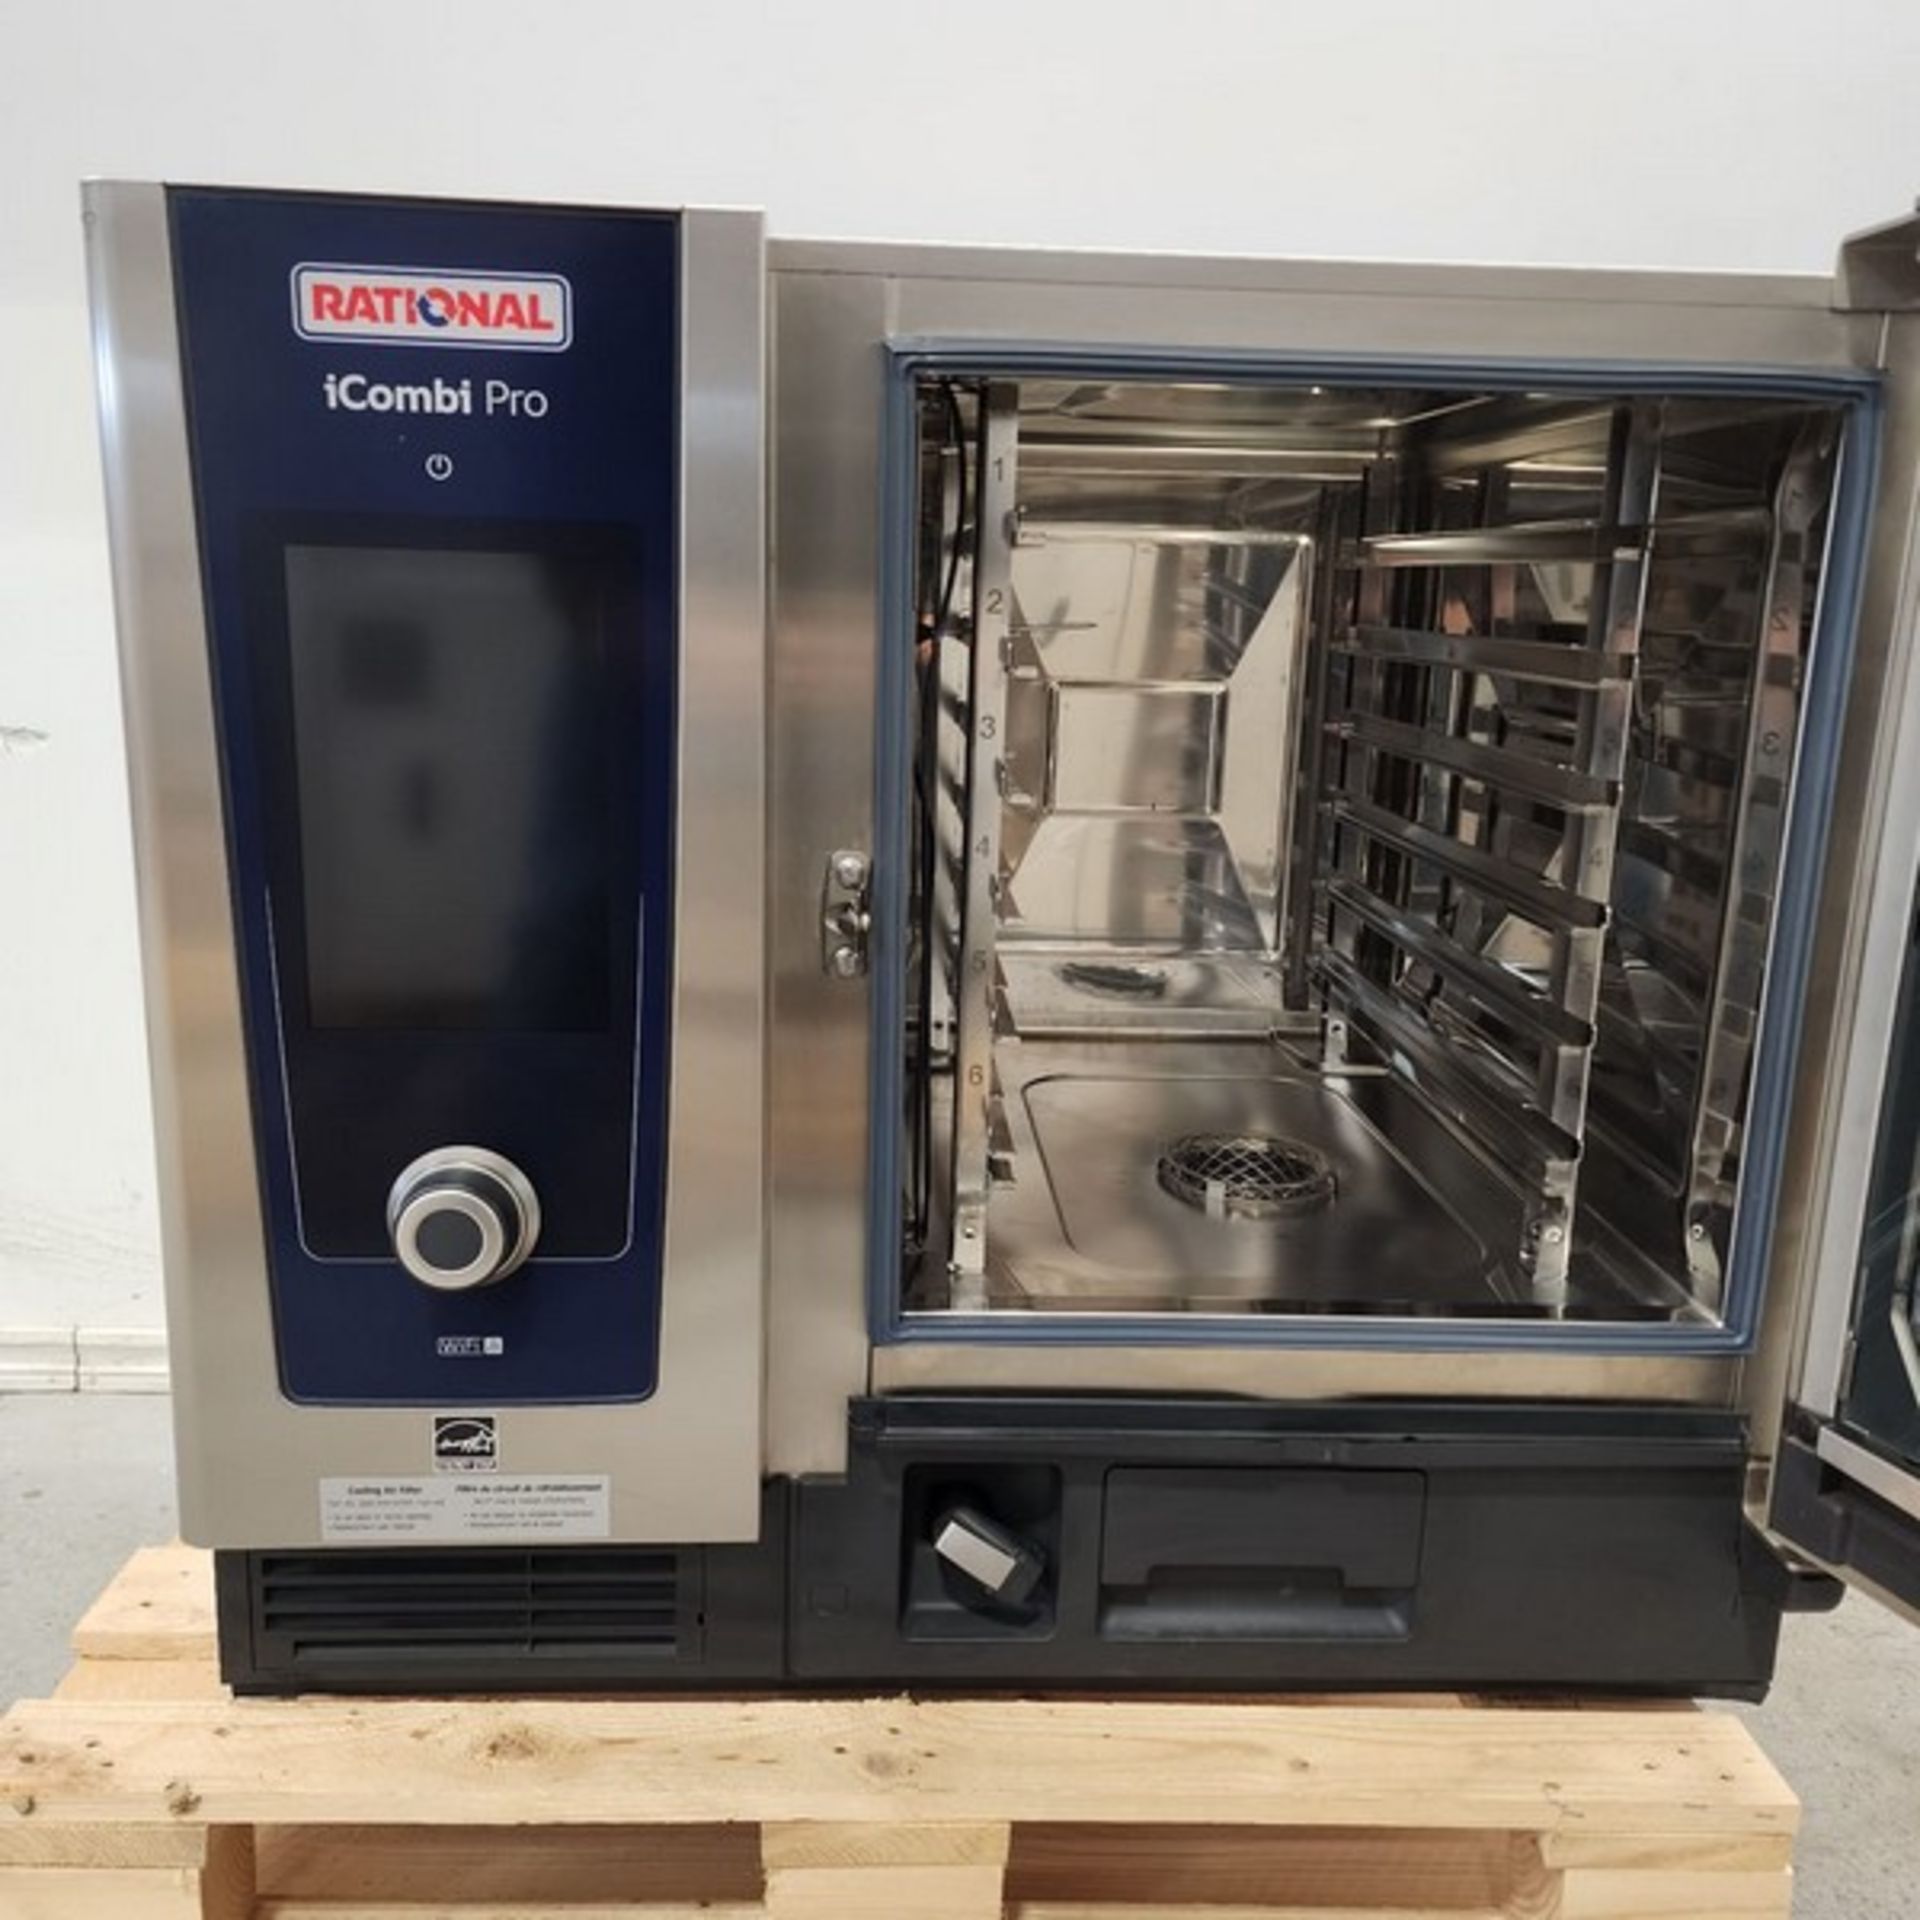 Rational Oven 480 v 3 phase brand new icombi pro new condition (Item #103R) (simple loading Fee $ - Bild 3 aus 7